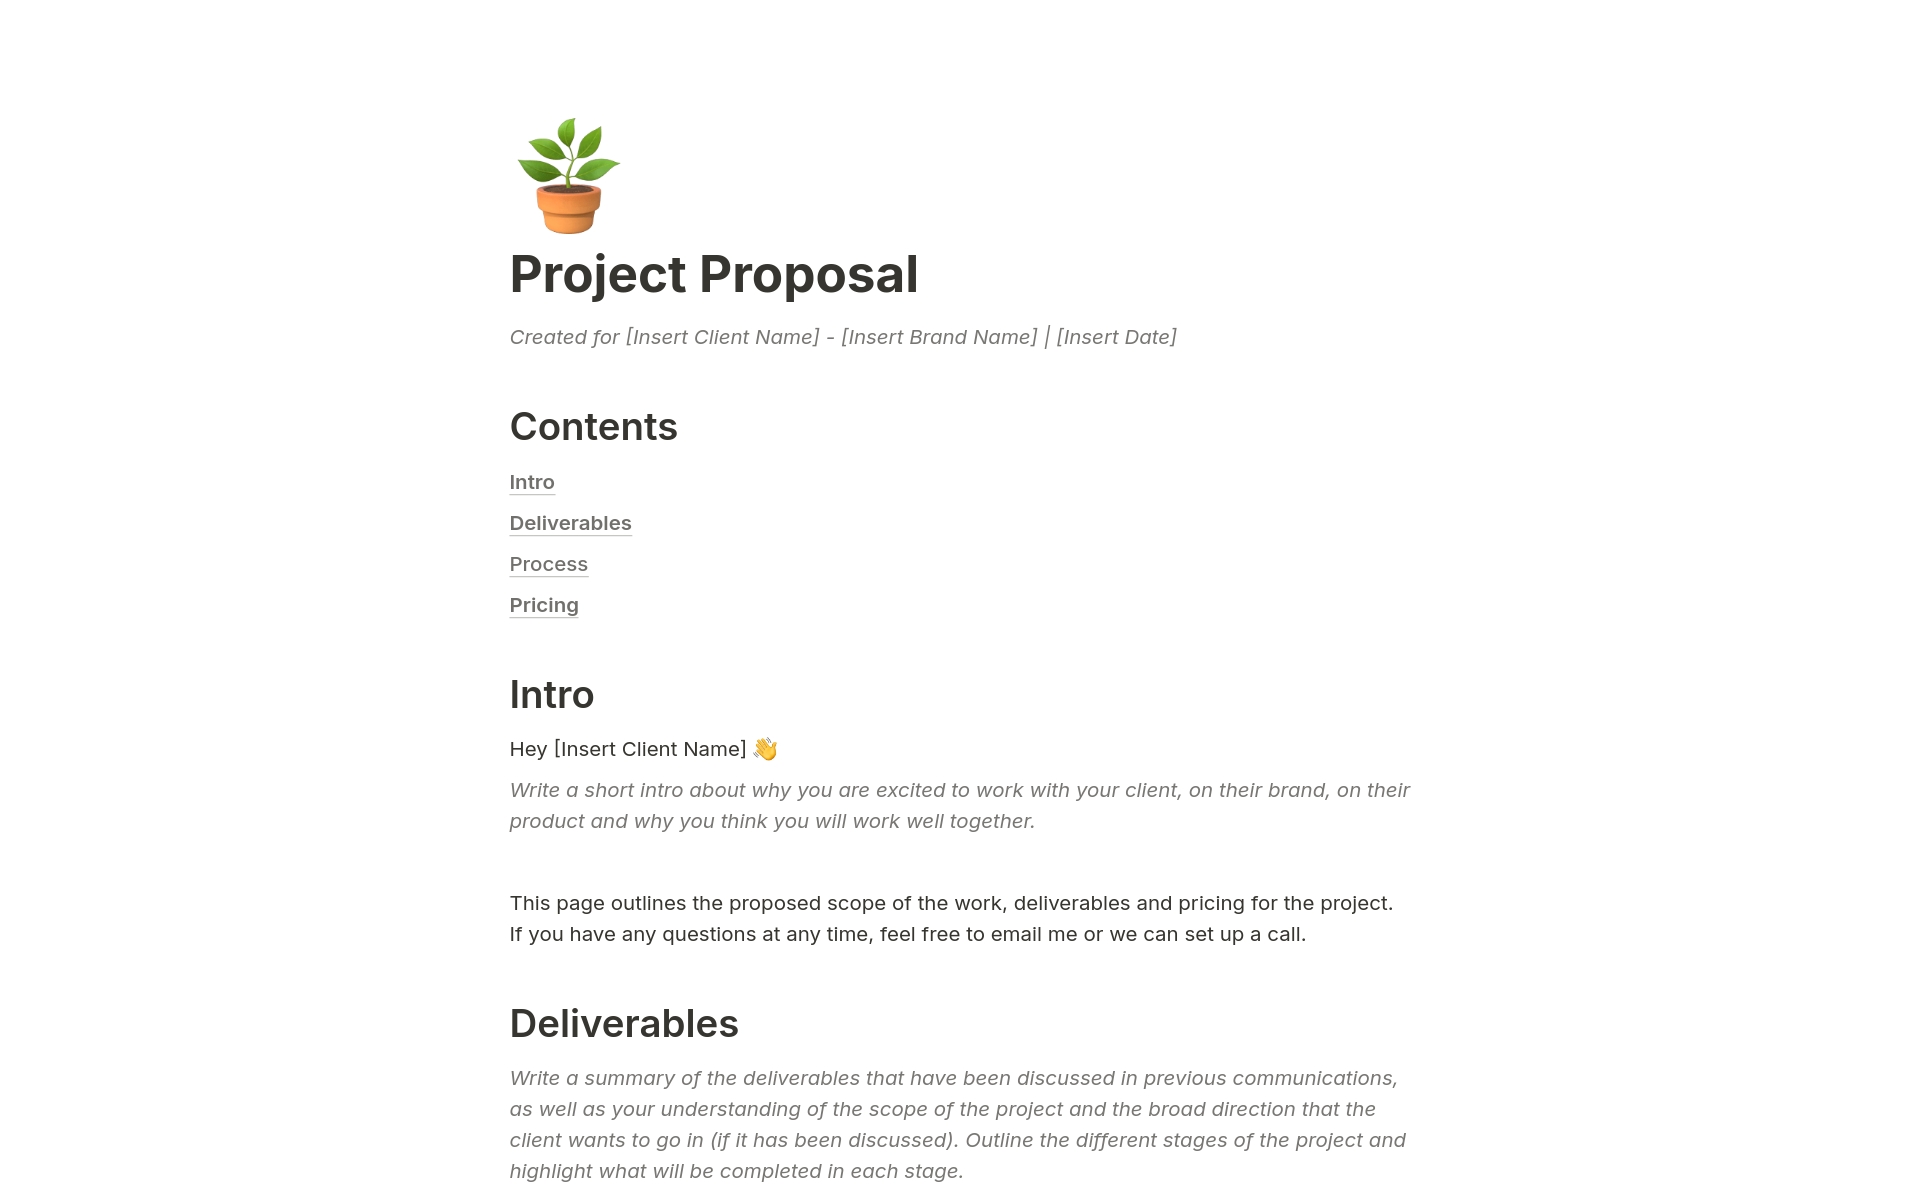 Elevate your client interactions and win more projects with this Project Proposal Template. Tailored specifically for freelance designers, this template offers a comprehensive framework to streamline the client process from initial contact to project contact to project completion